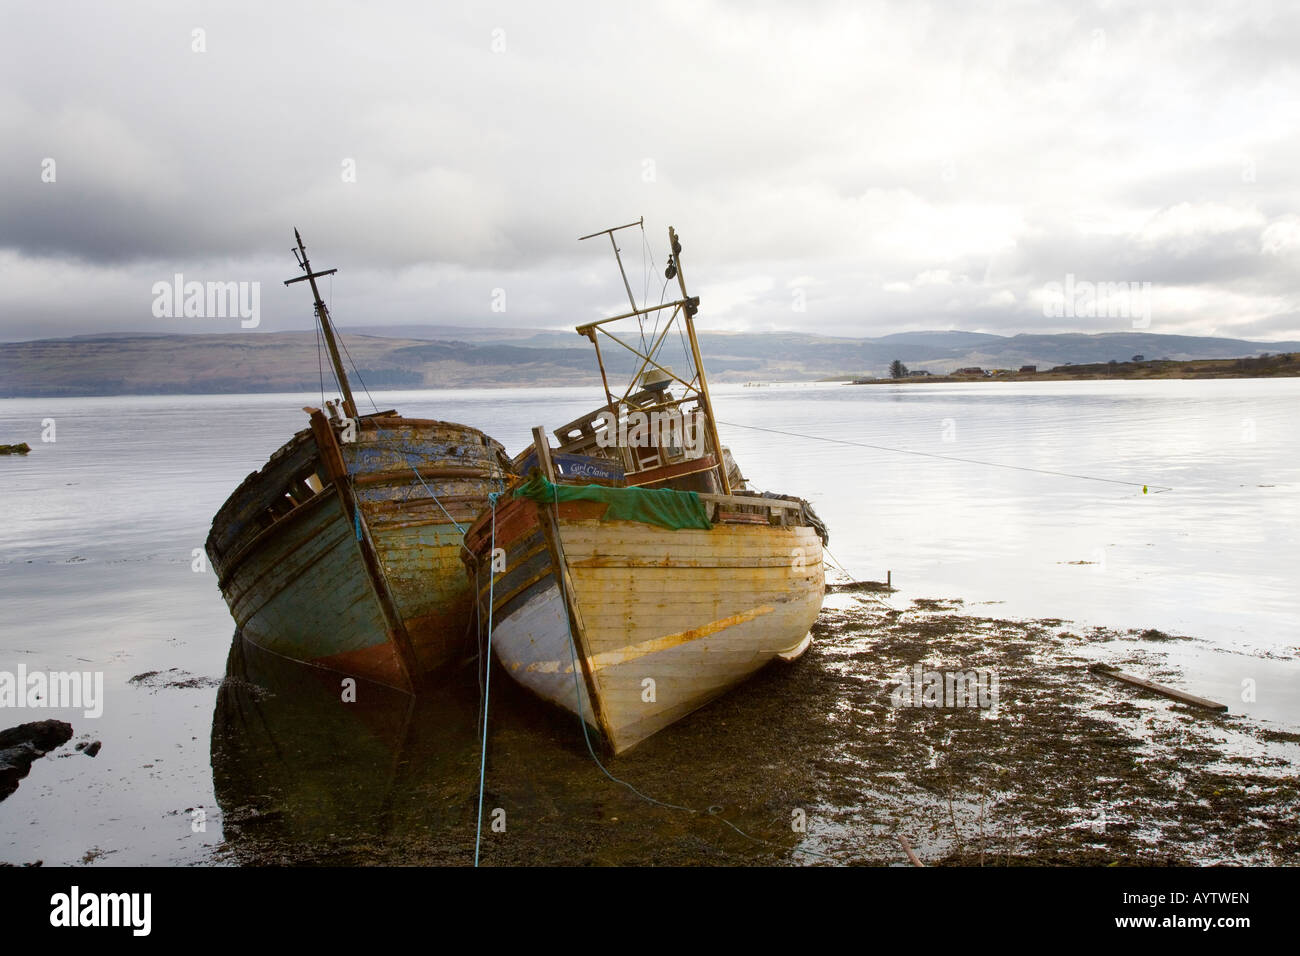 Two beached, Wrecked & Abandoned old wooden fishing boats on the beach at Salen, Isle of Mull, Argyll, Scotland UK Stock Photo